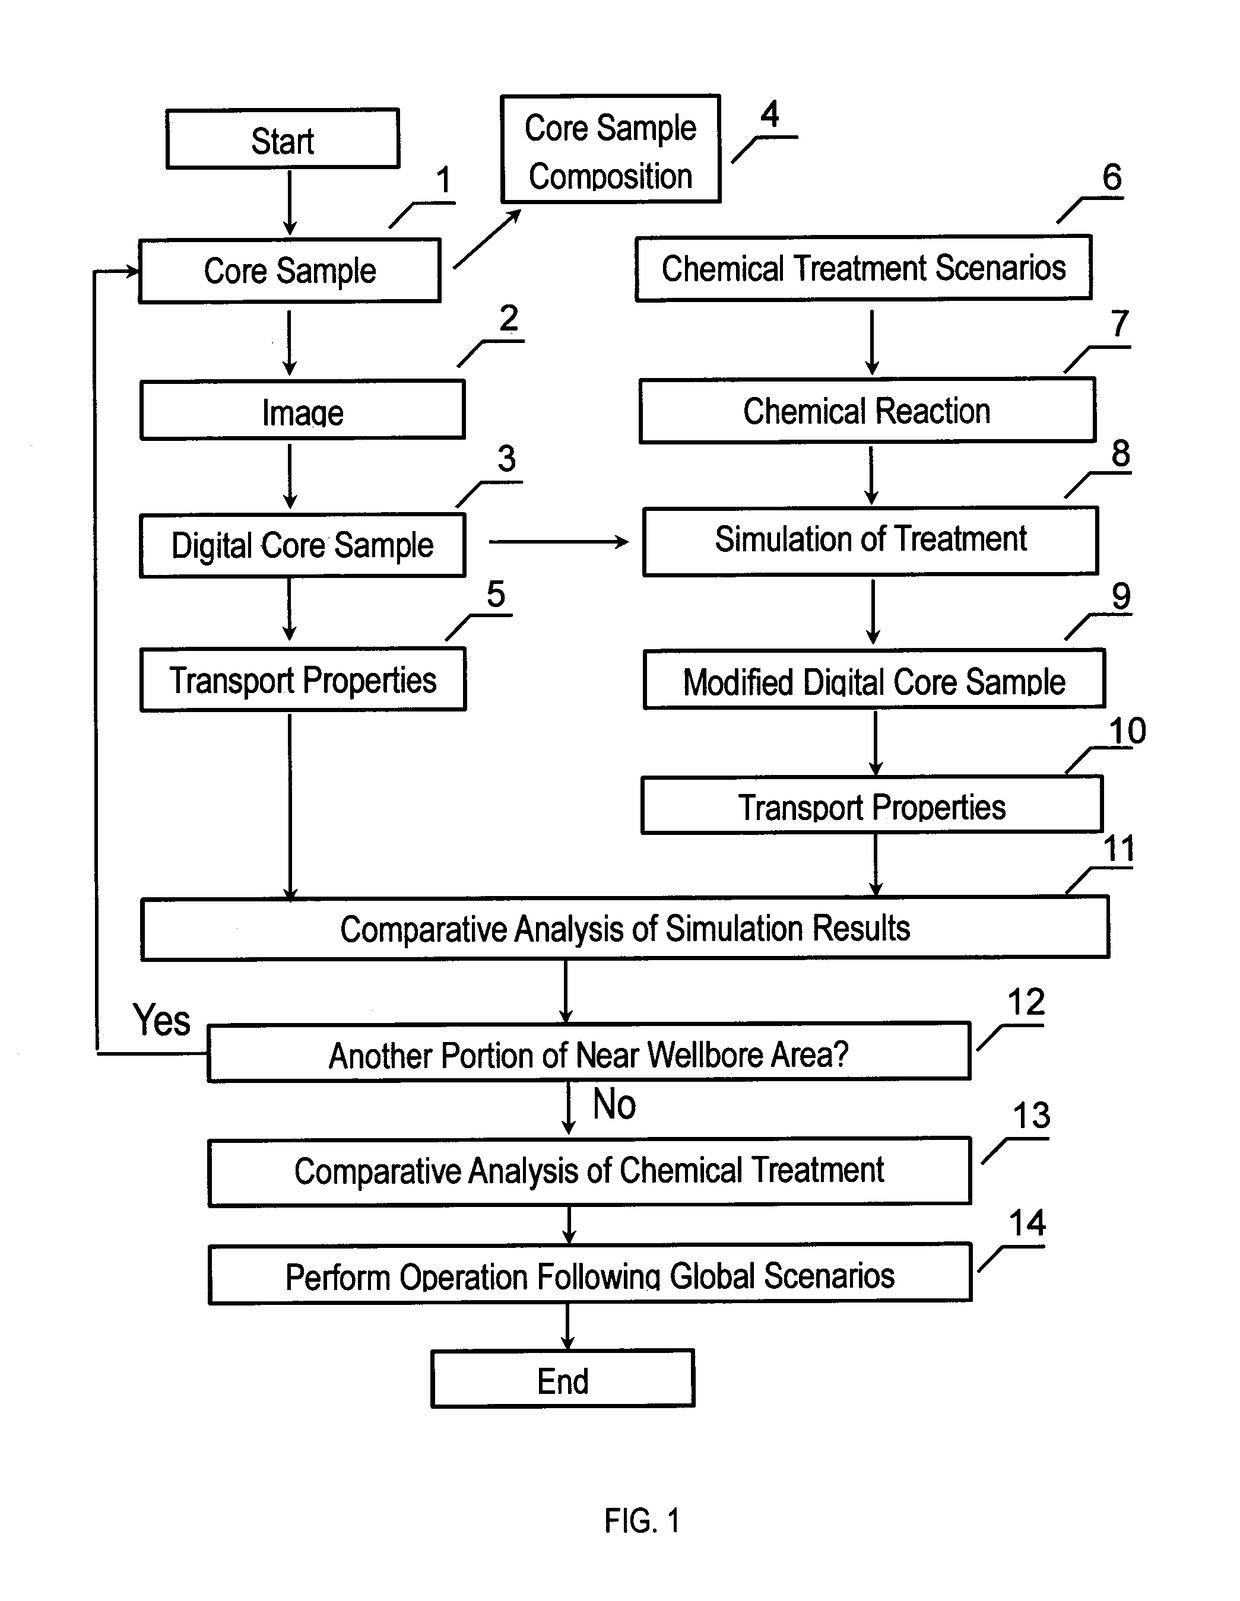 A method and a system for performing chemical treatment of a near wellbore area